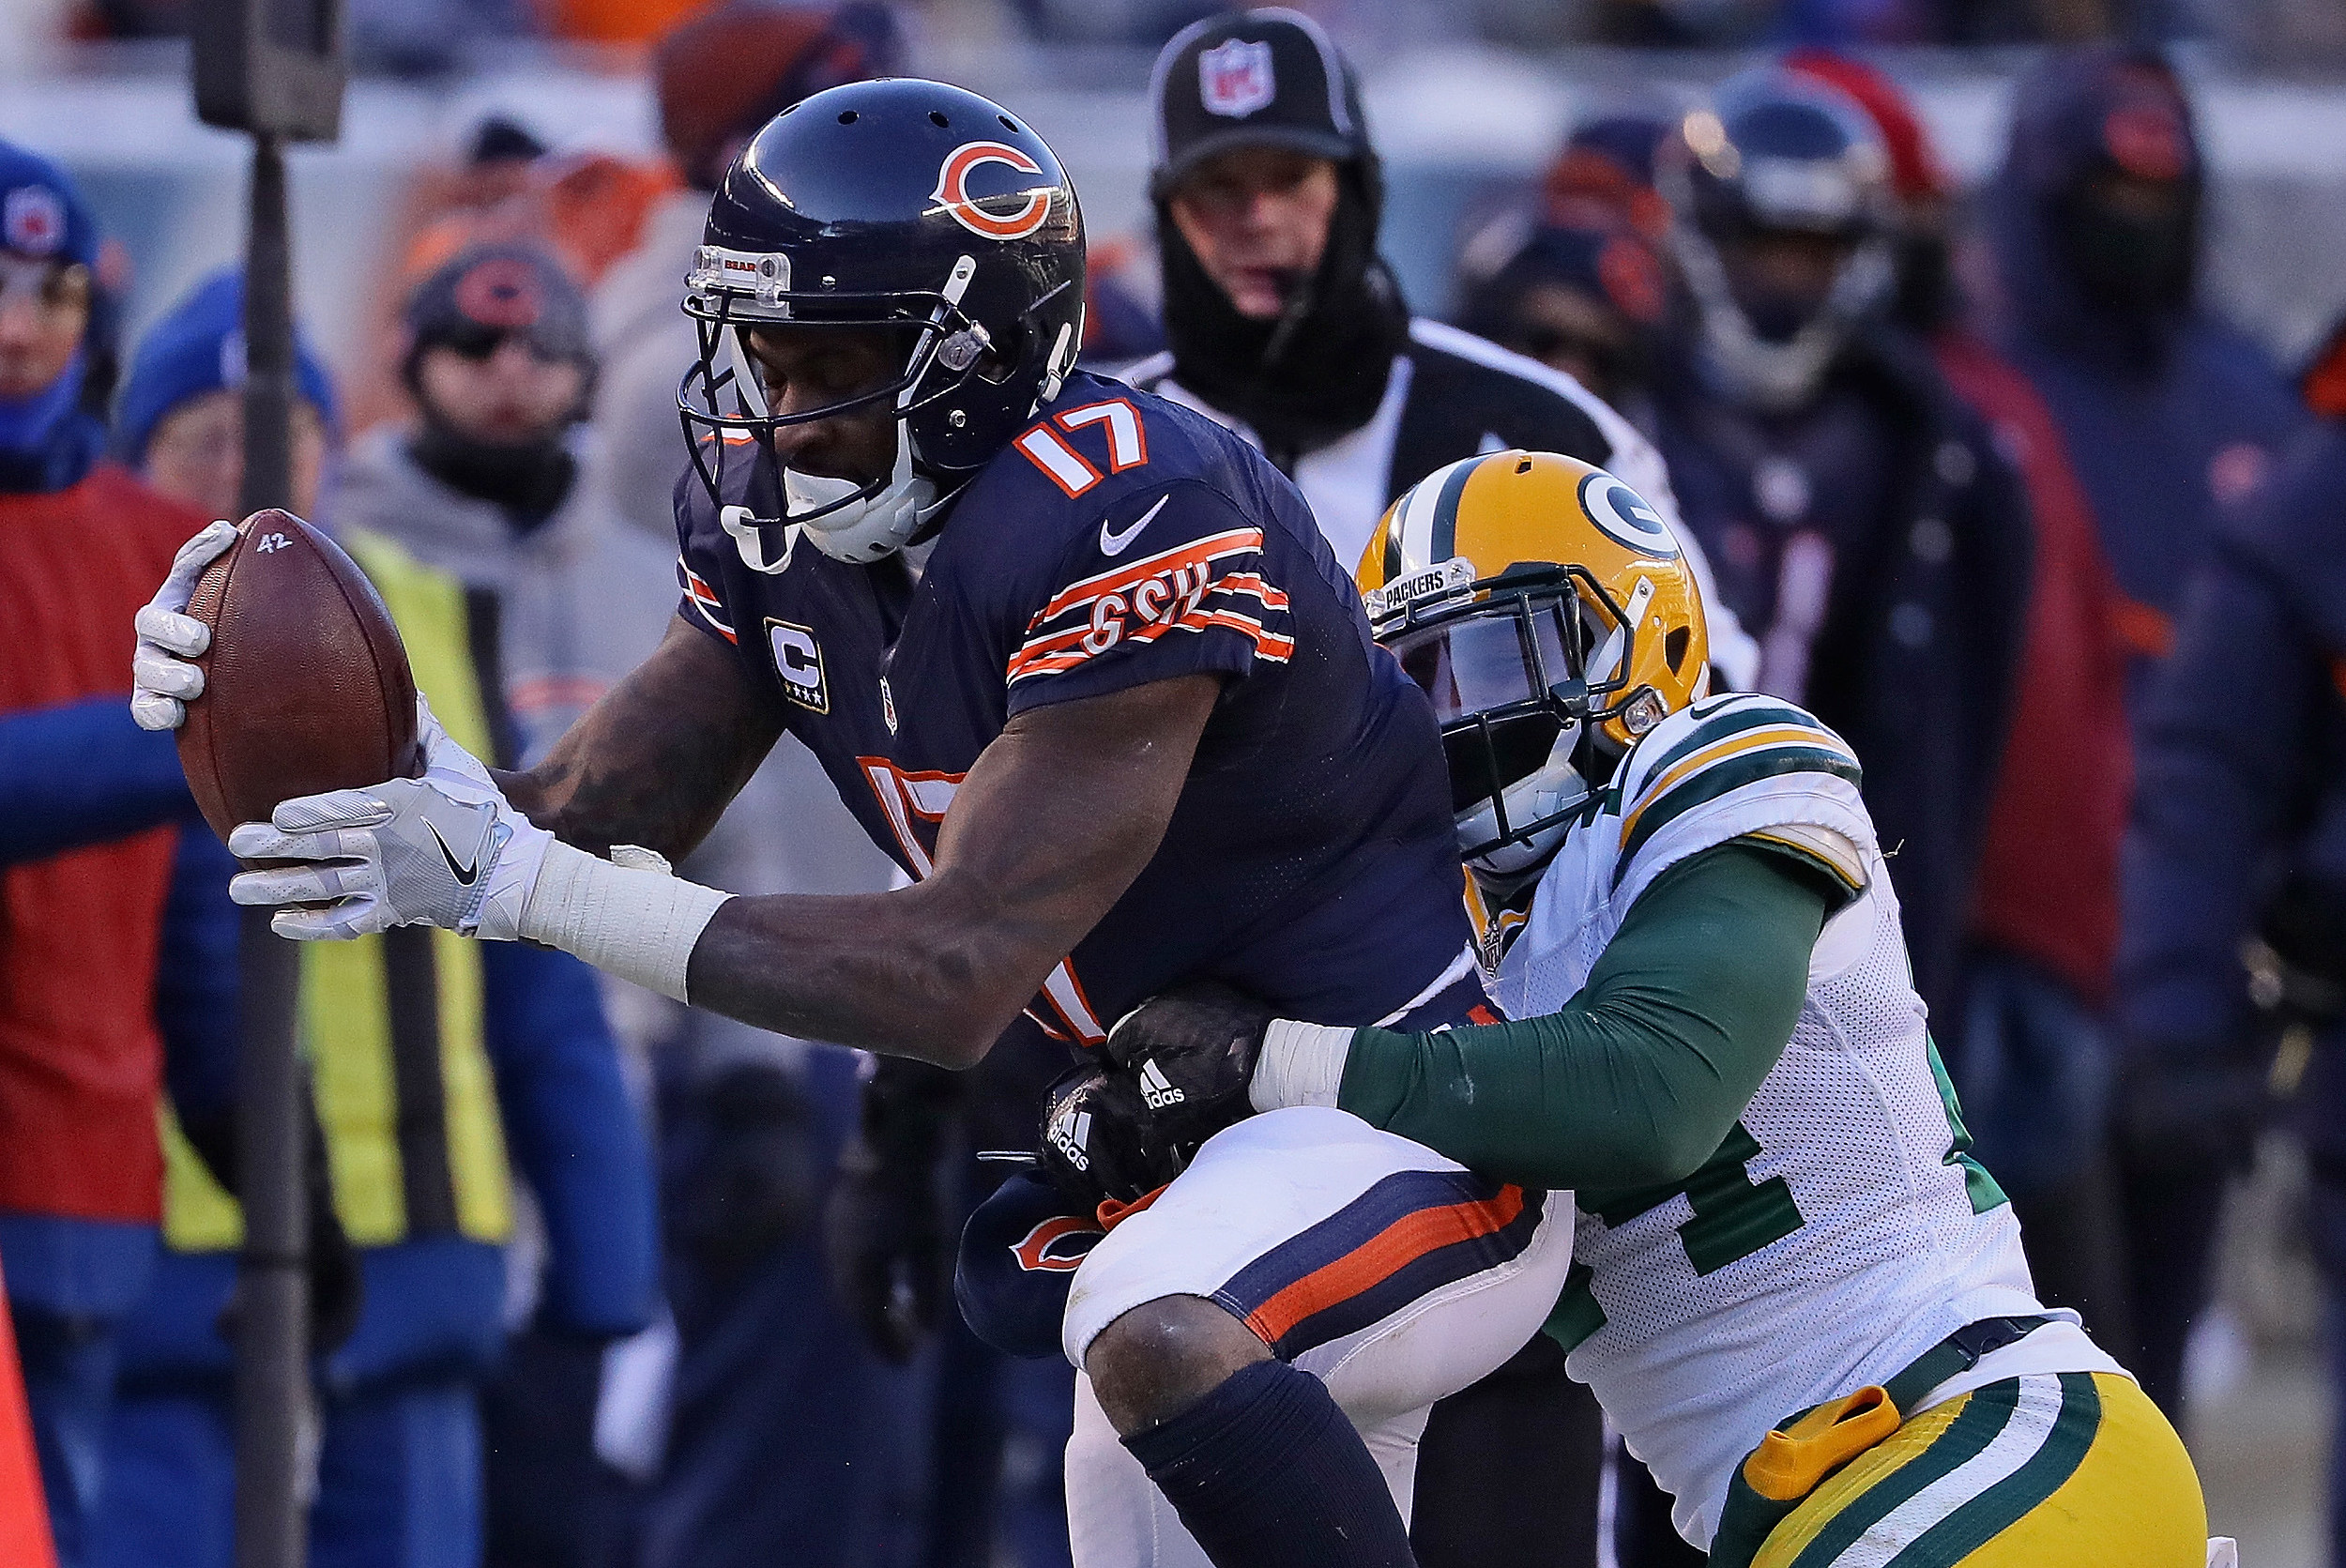 How to watch, listen to Chicago Bears vs. Green Bay Packers